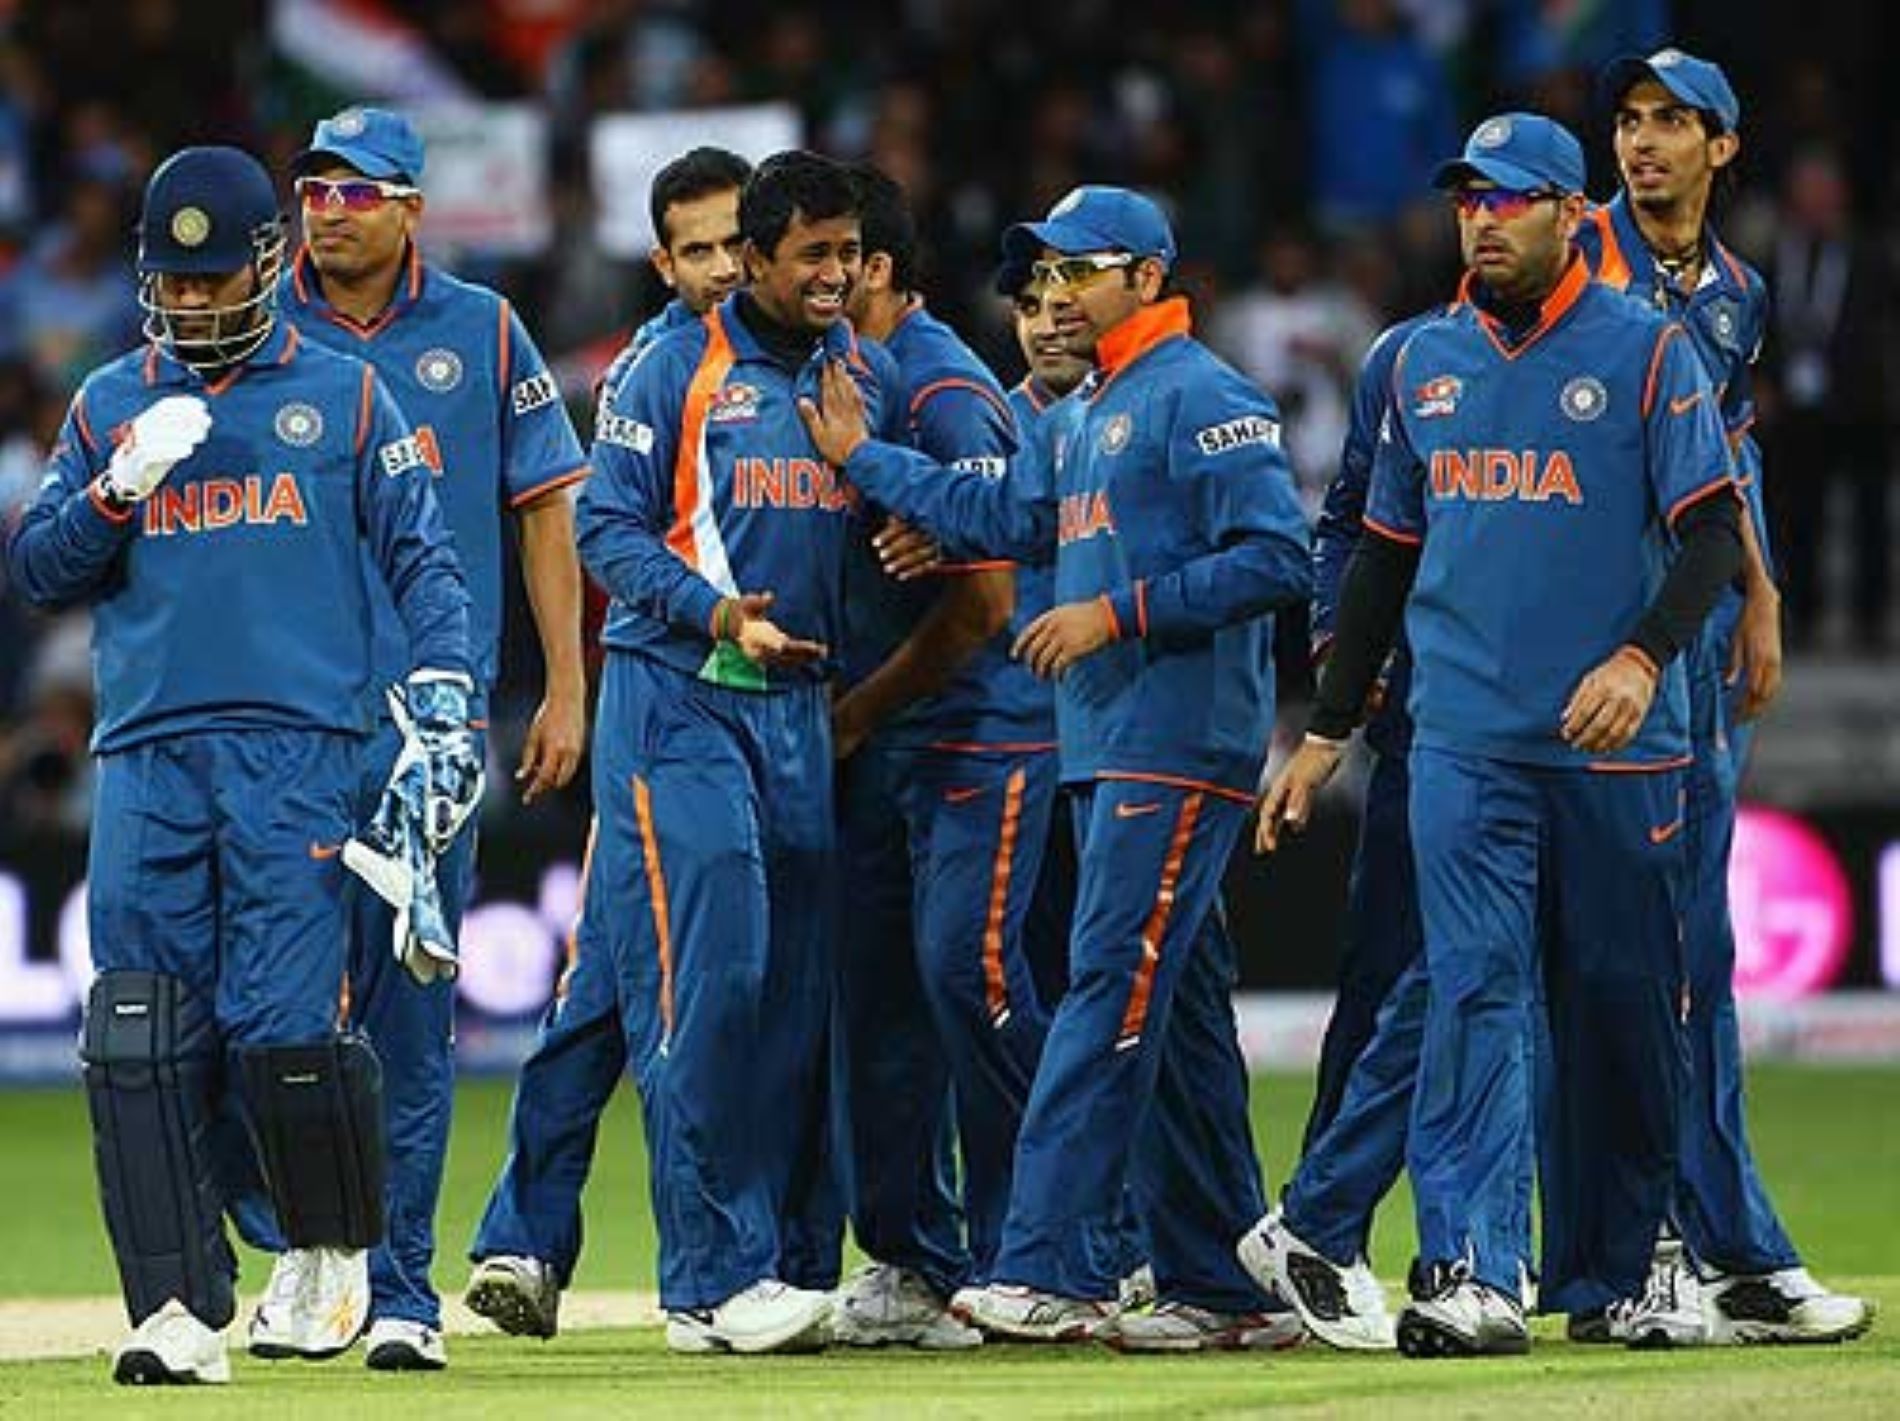 Team India endured a disastrous campaign at the 2009 T20 World Cup.